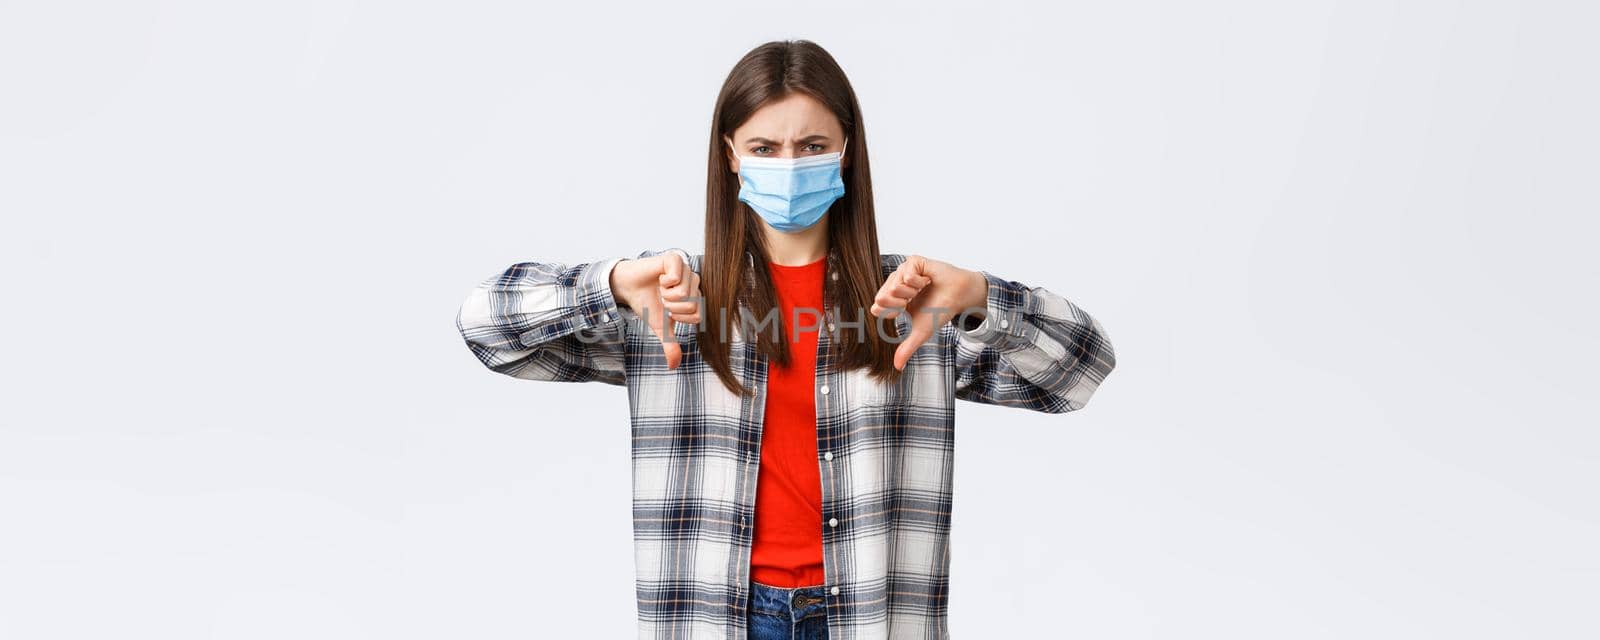 Coronavirus outbreak, leisure on quarantine, social distancing and emotions concept. Disappointed and mad young woman in medical mask vote against, show thumb-down and grimacing dismay.